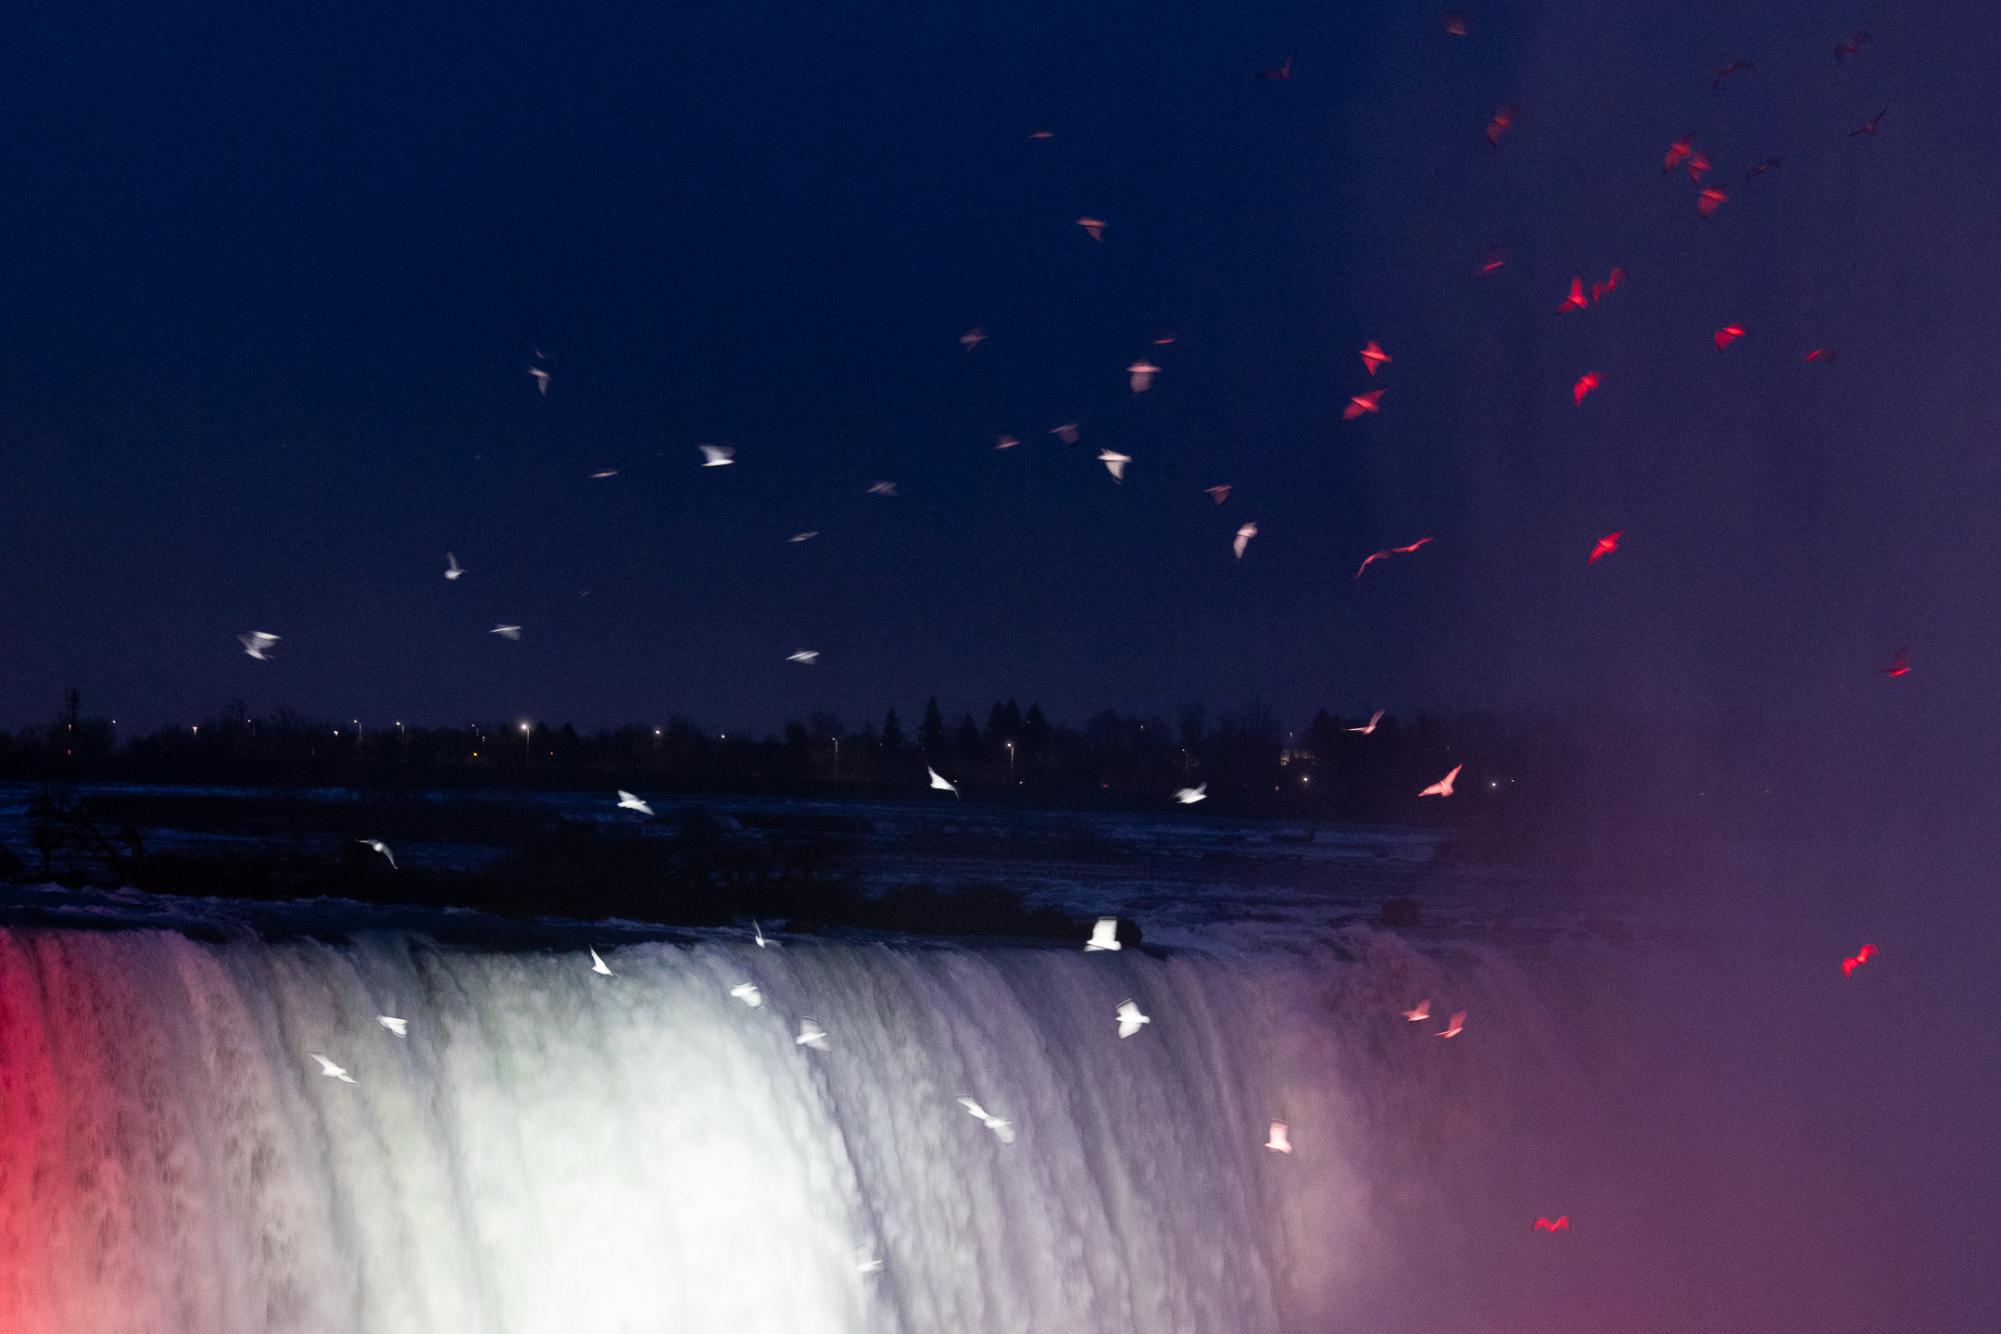 The Niagara Falls with red lights and lots of birds flying around.